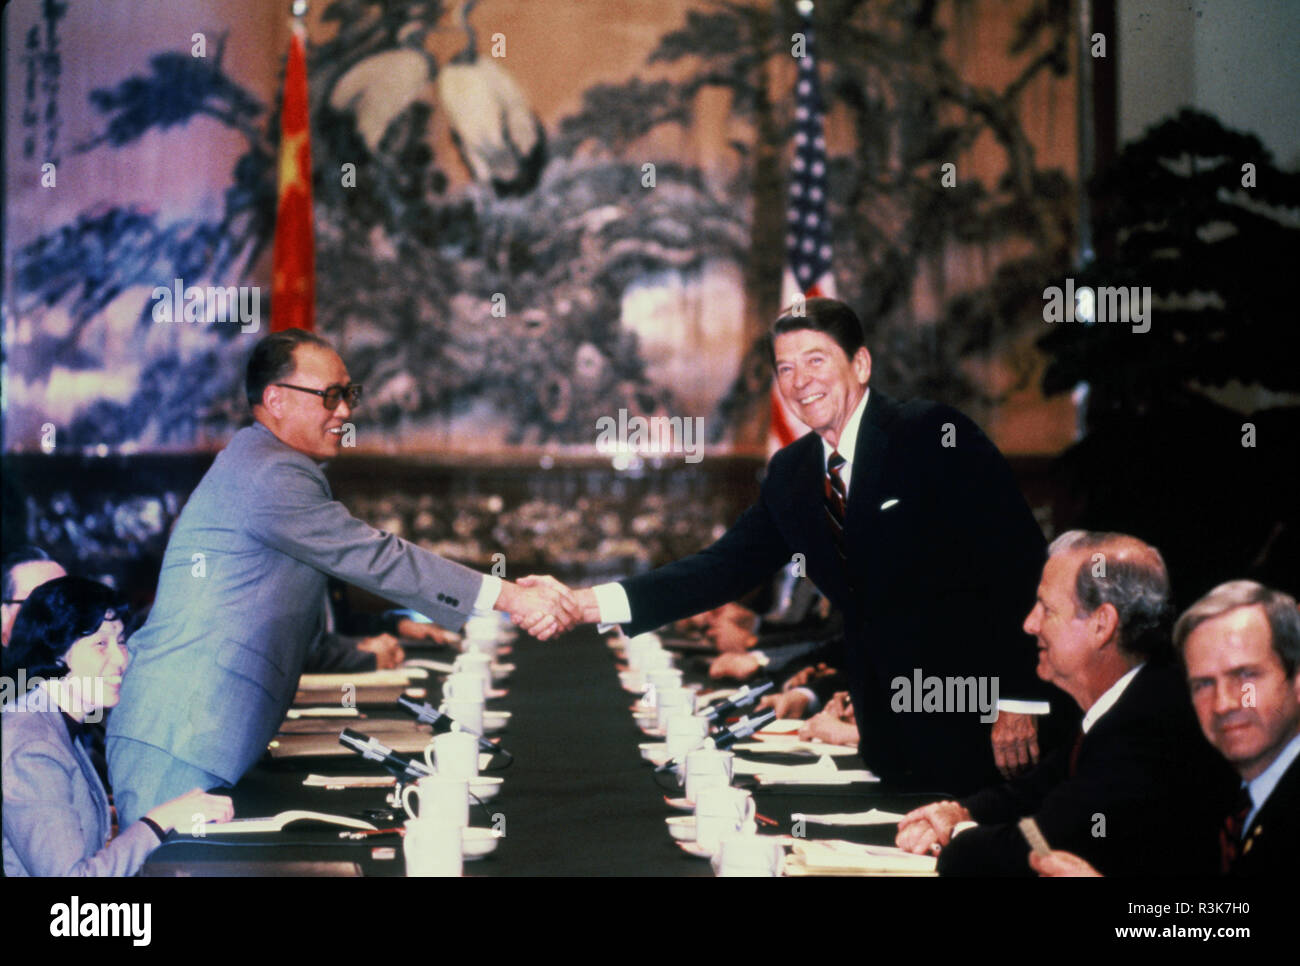 Donald Trump Shaking Hands with Ronald Reagan Giclee Photo Print 